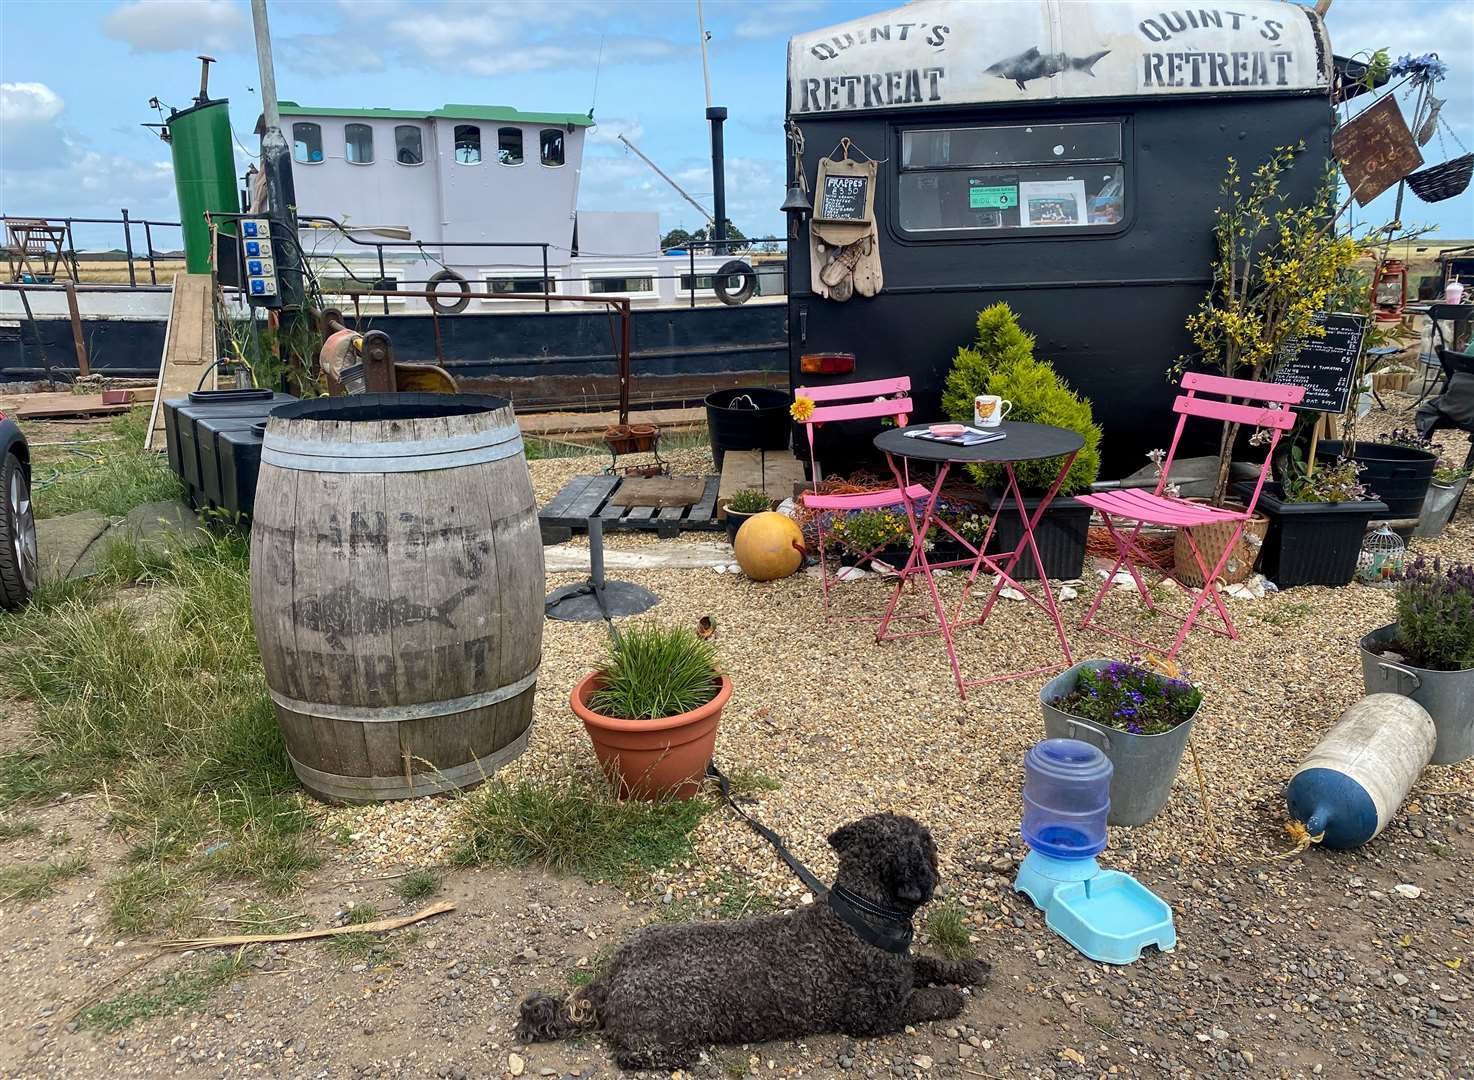 We finally found the cafe and were welcomed by the owner’s dog before anyone else. Picture: Sam Lawrie